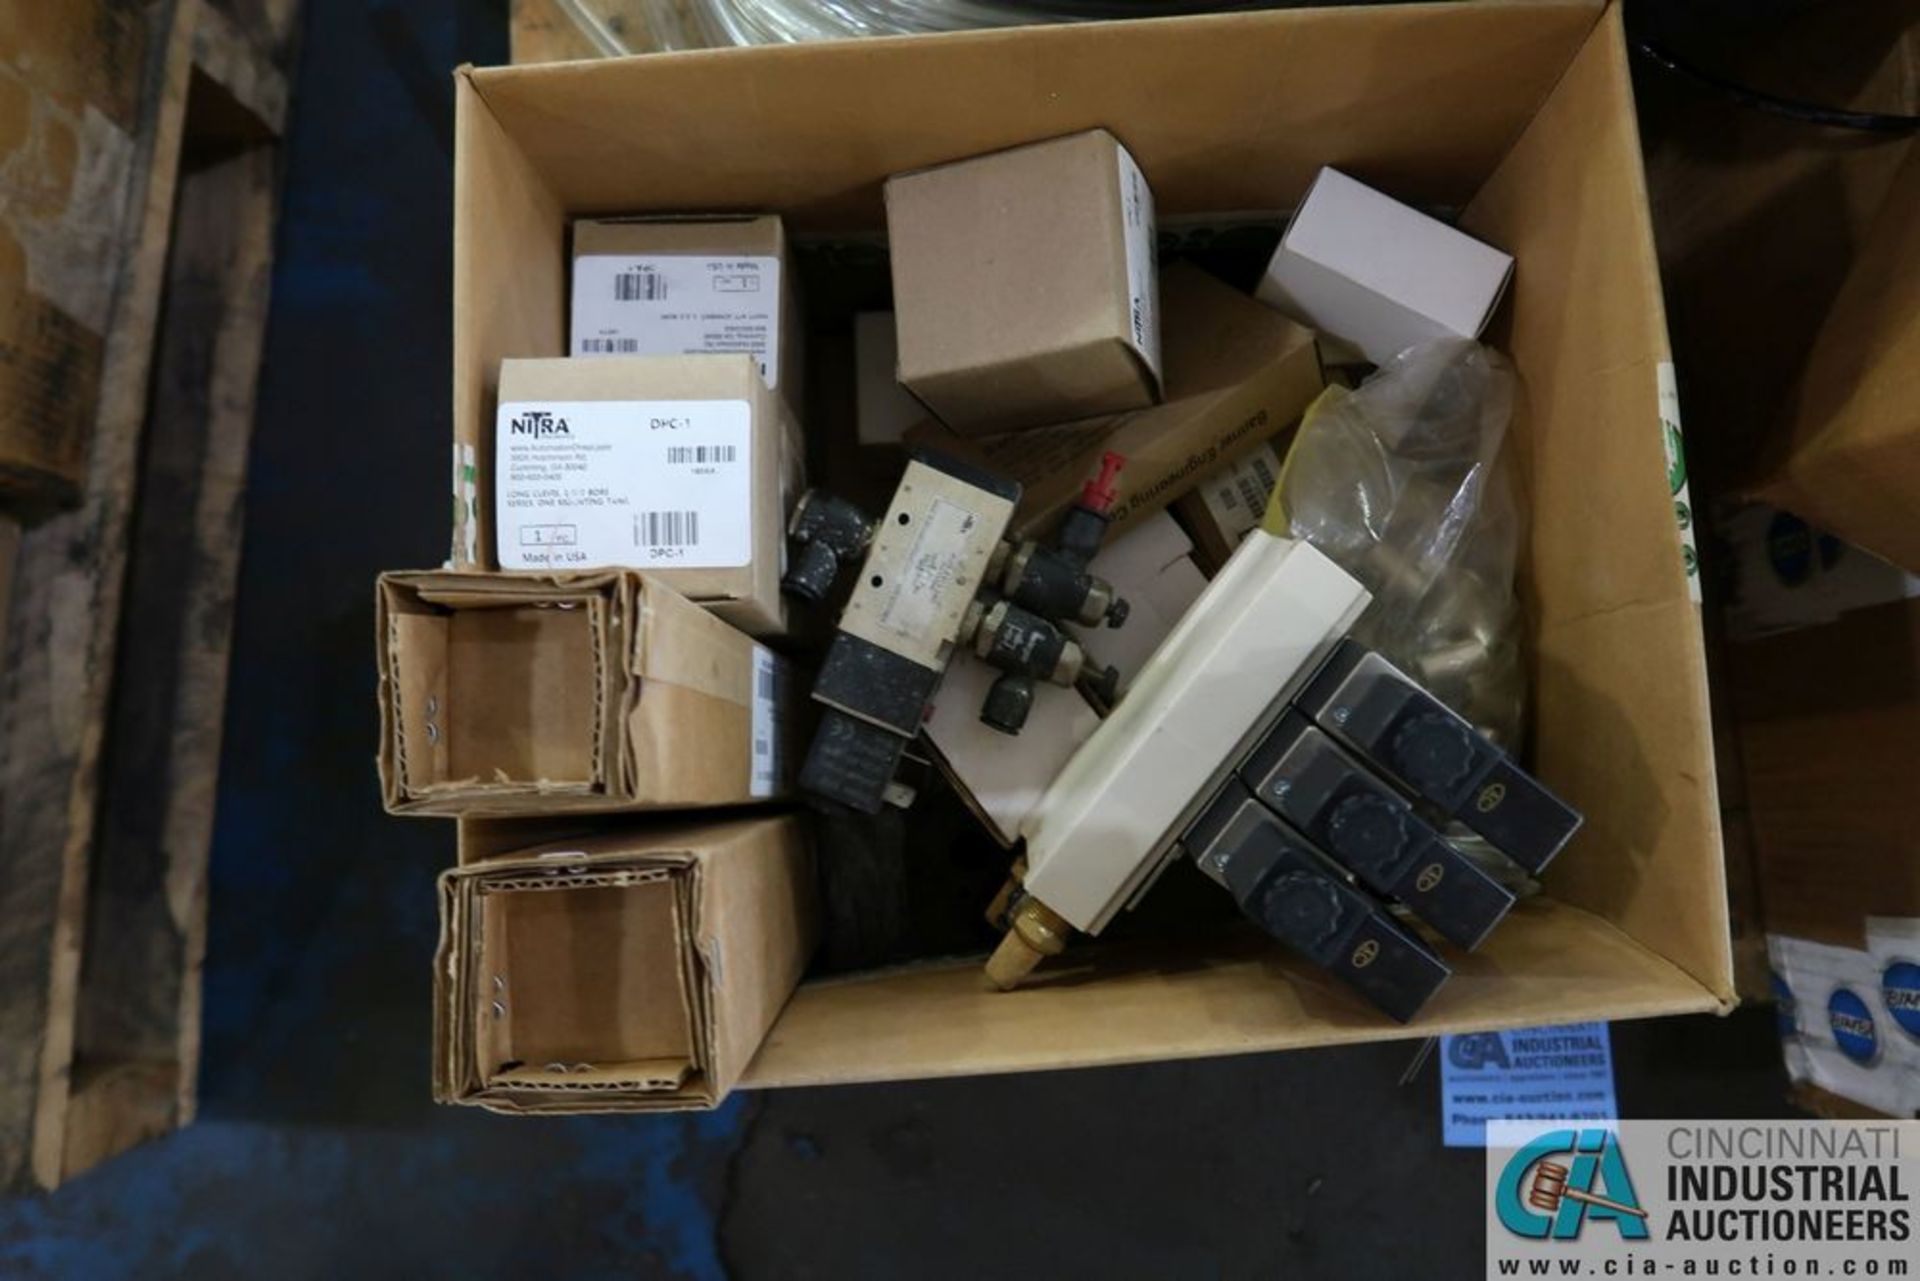 (LOT) (5) SKIDS ELECTRICAL BOXES, HARDWARE, PLUGS, SWITCHES, WIRE, HOSE, DRIVES - Image 9 of 16